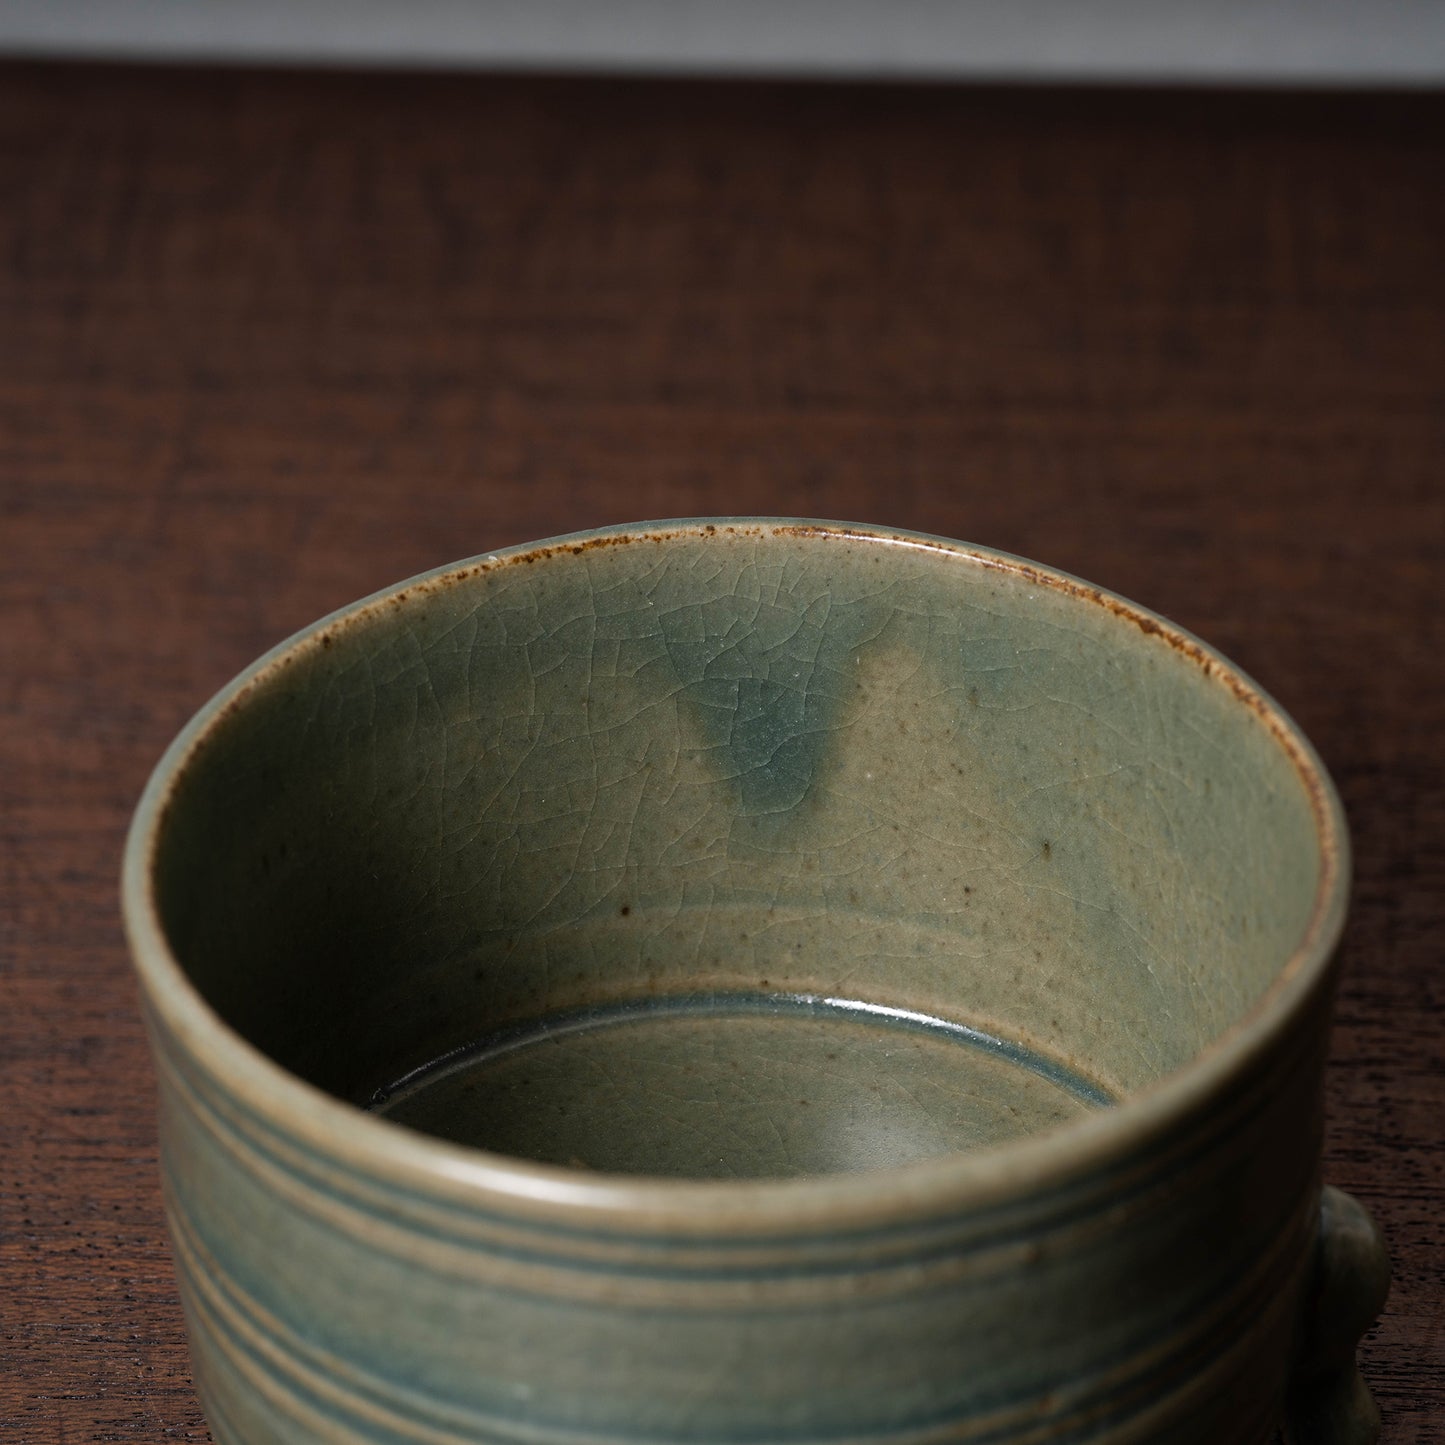 Northern Song Dynasty Yue Ware Brush Wash with Three legs